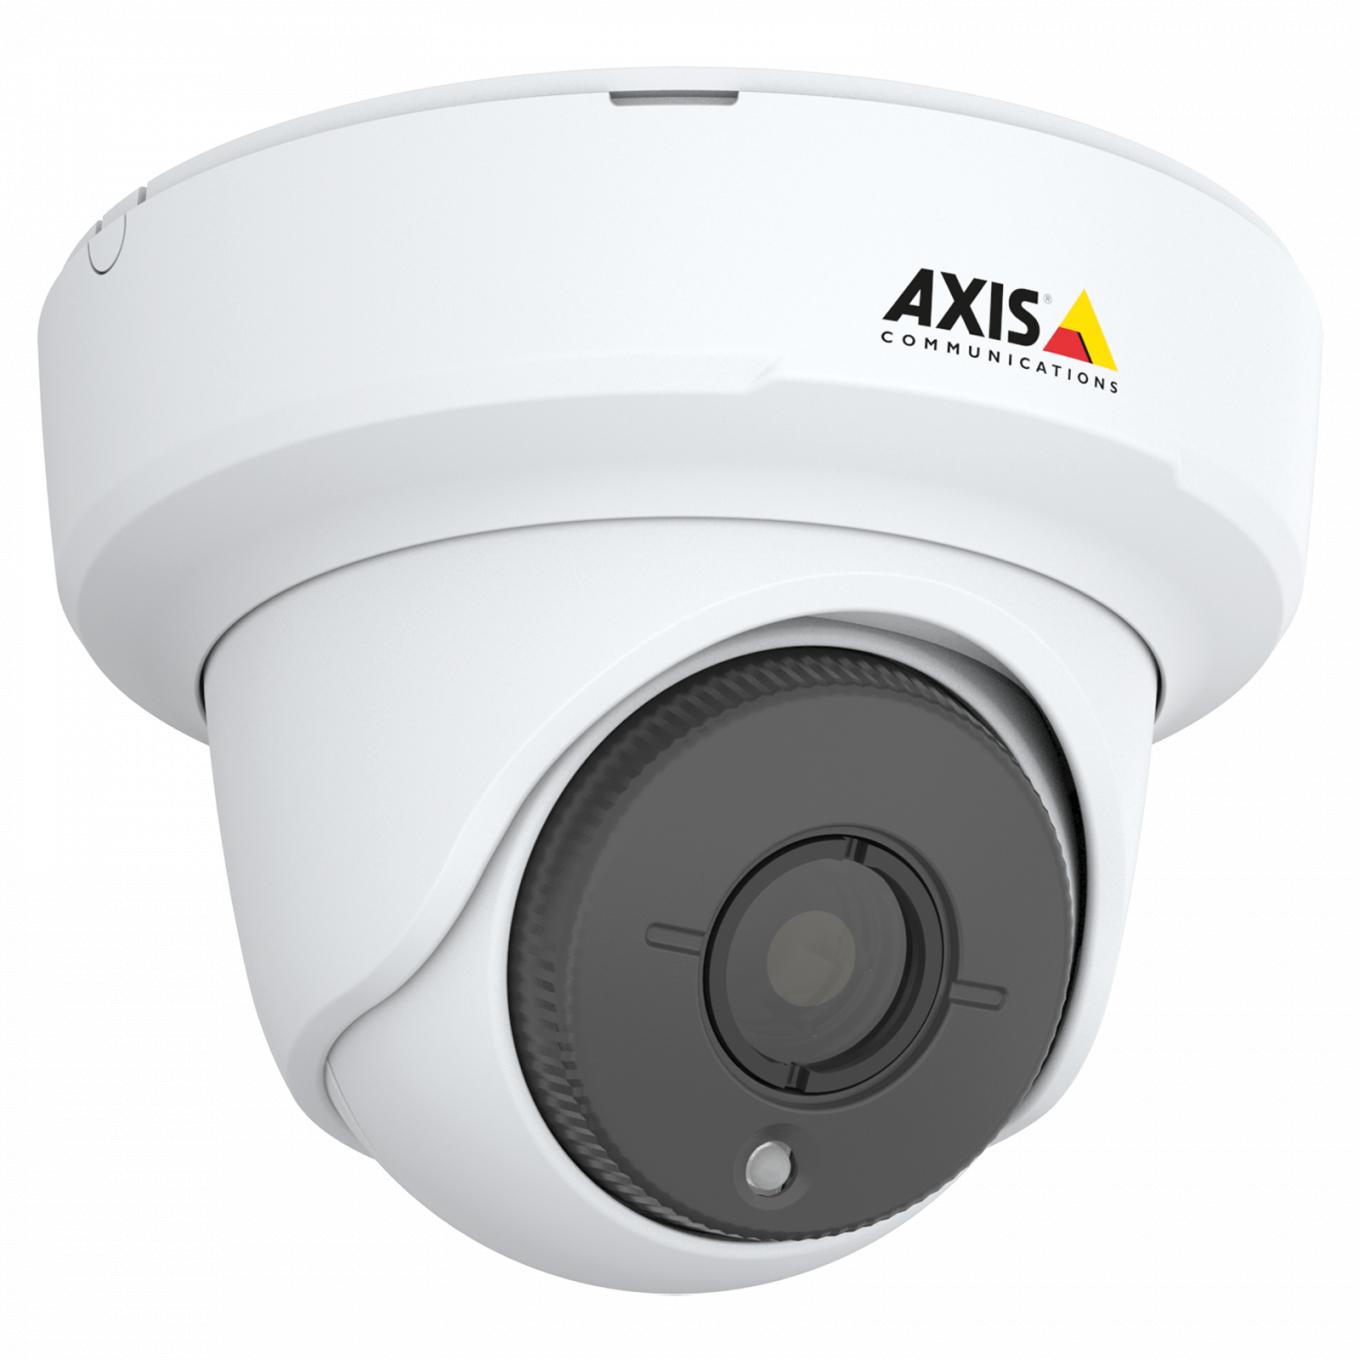 AXIS FA3105-L Eyeball Sensor Unit has Forensic WDR. The product is viewed from its right angle.